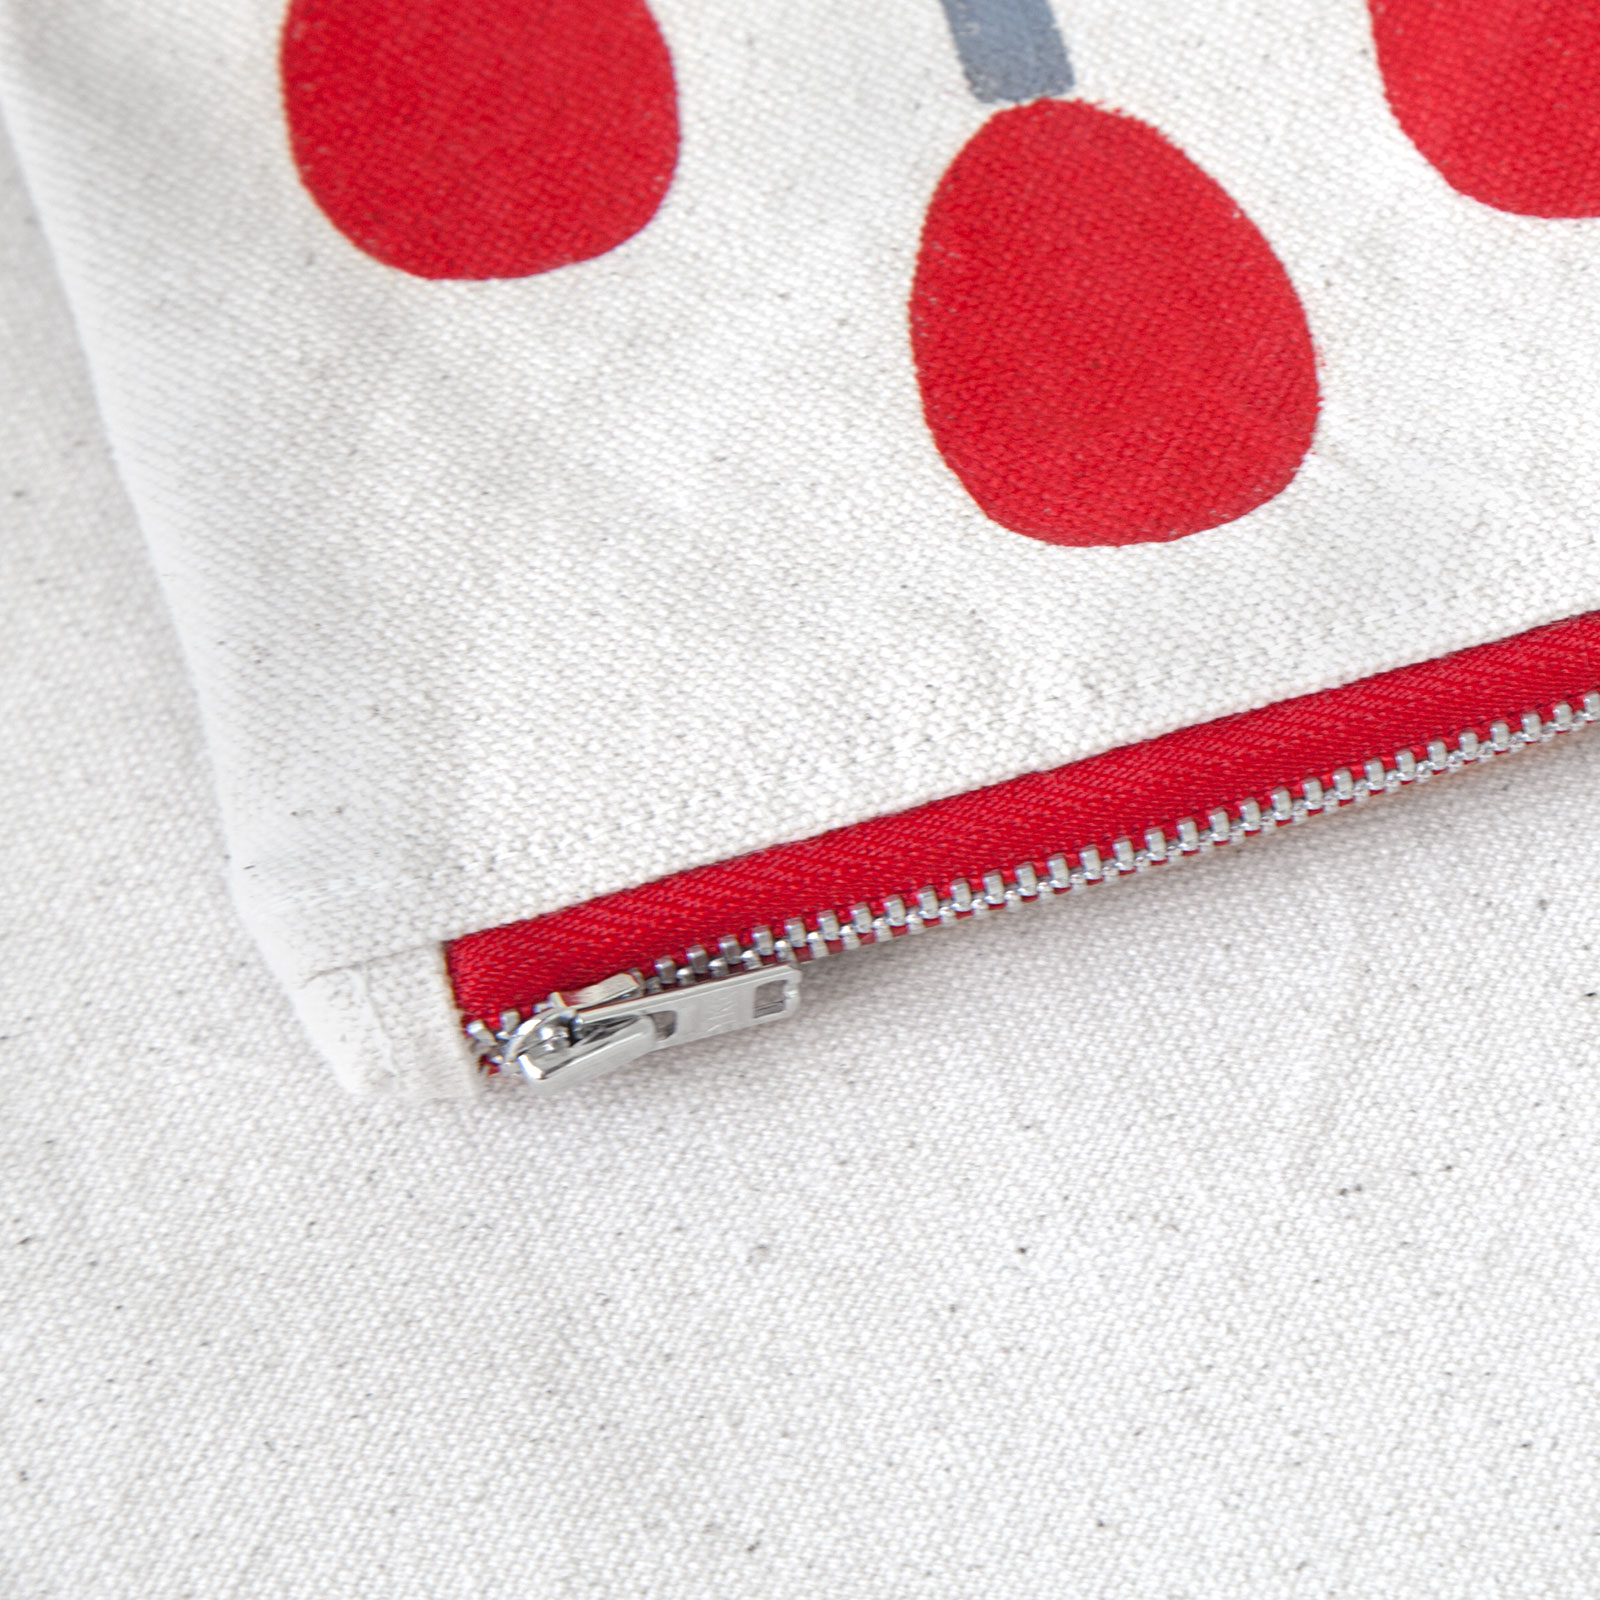 Red, orange, gray dots and lines hand-printed cotton zipper pouch